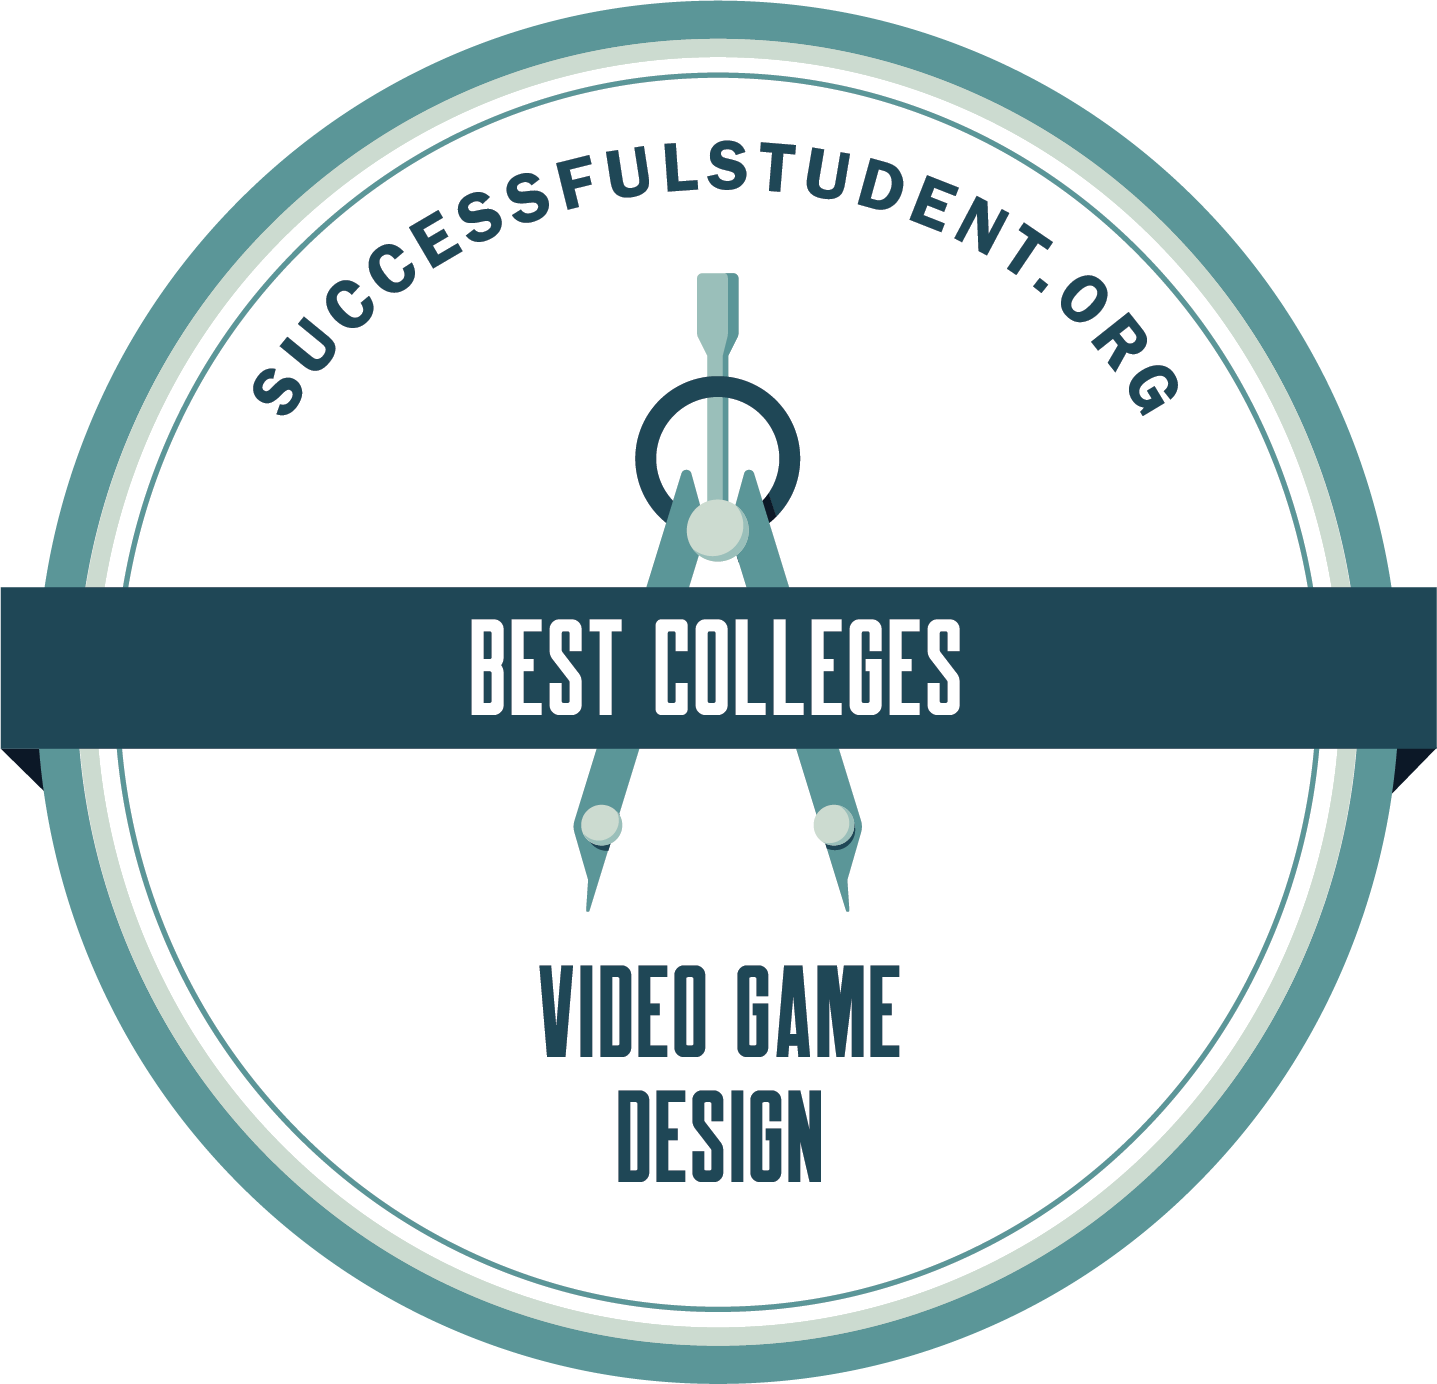 The 50 Best Video Game Design Colleges - Successful Student